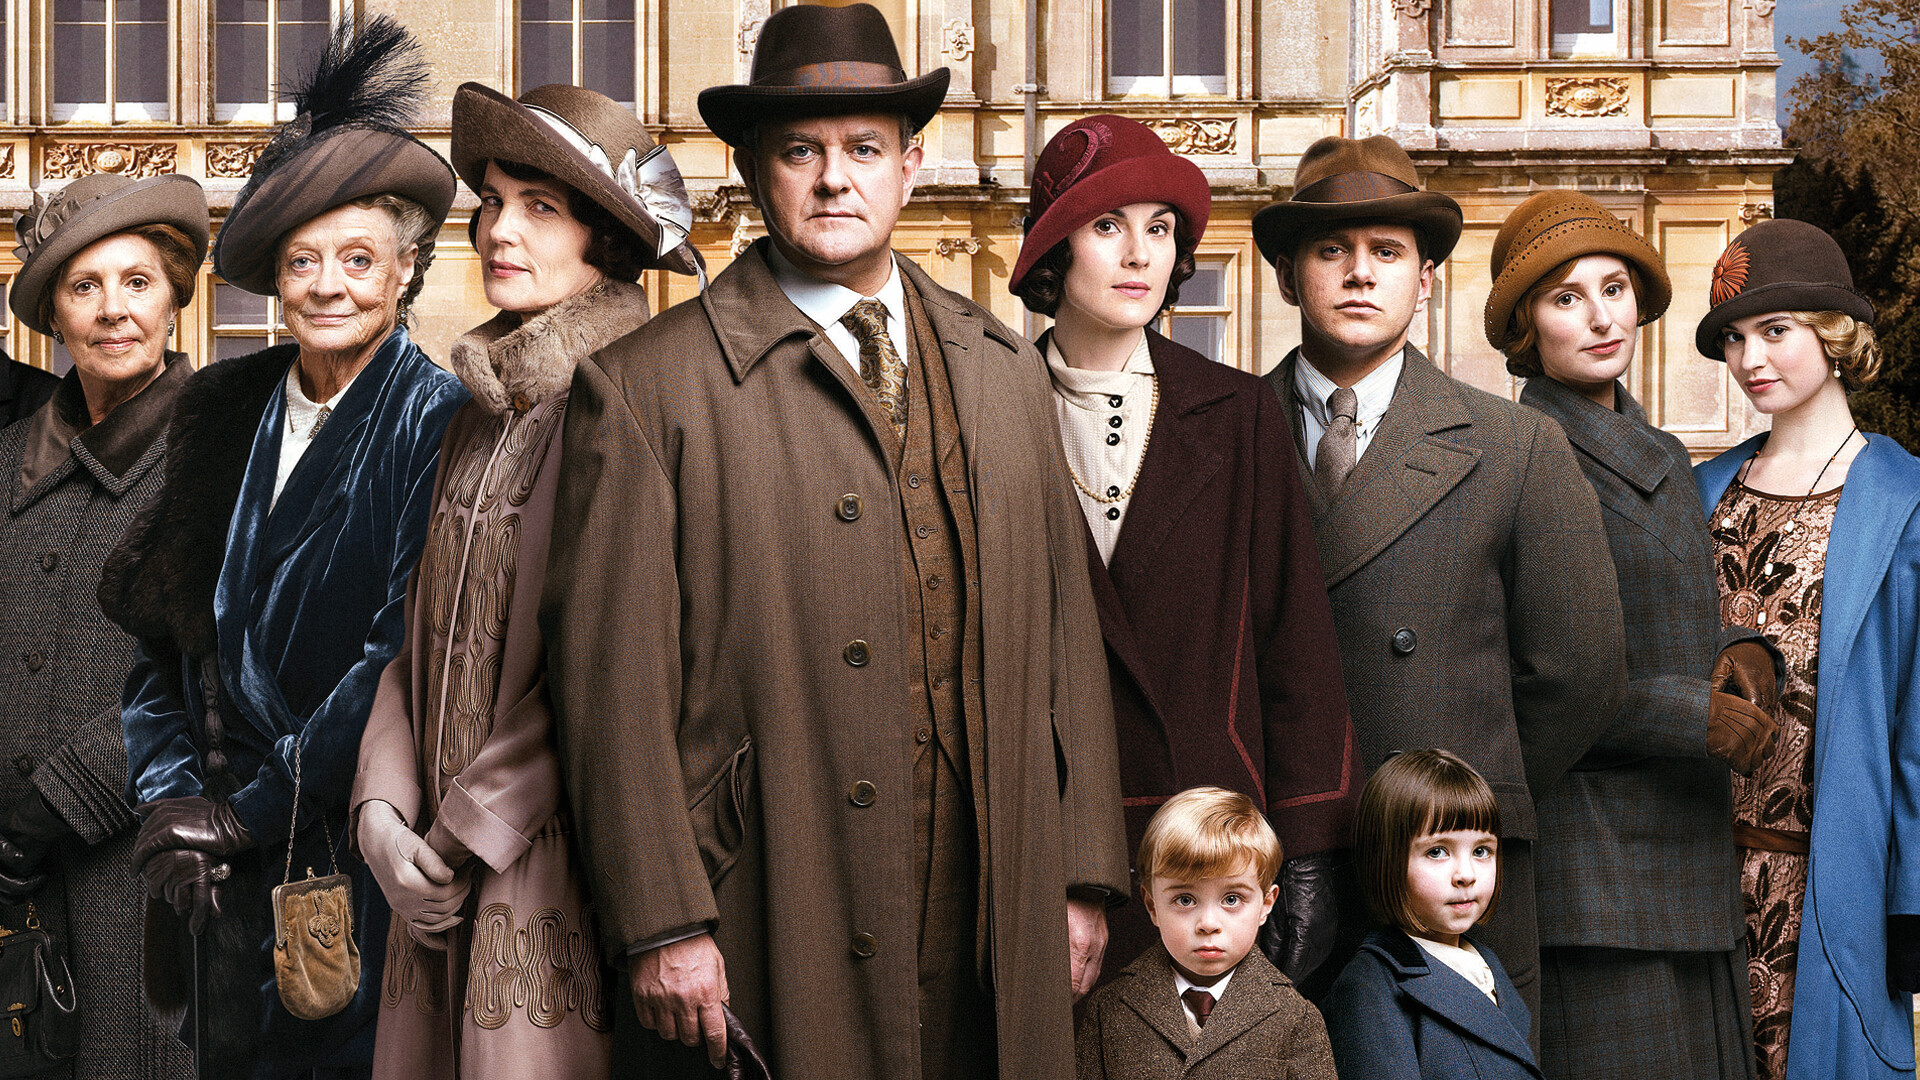 Downton Abbey: The main cast is led by Hugh Bonneville as Robert Crawley, and Elizabeth McGovern as his wife Cora Crawley. 1920x1080 Full HD Wallpaper.